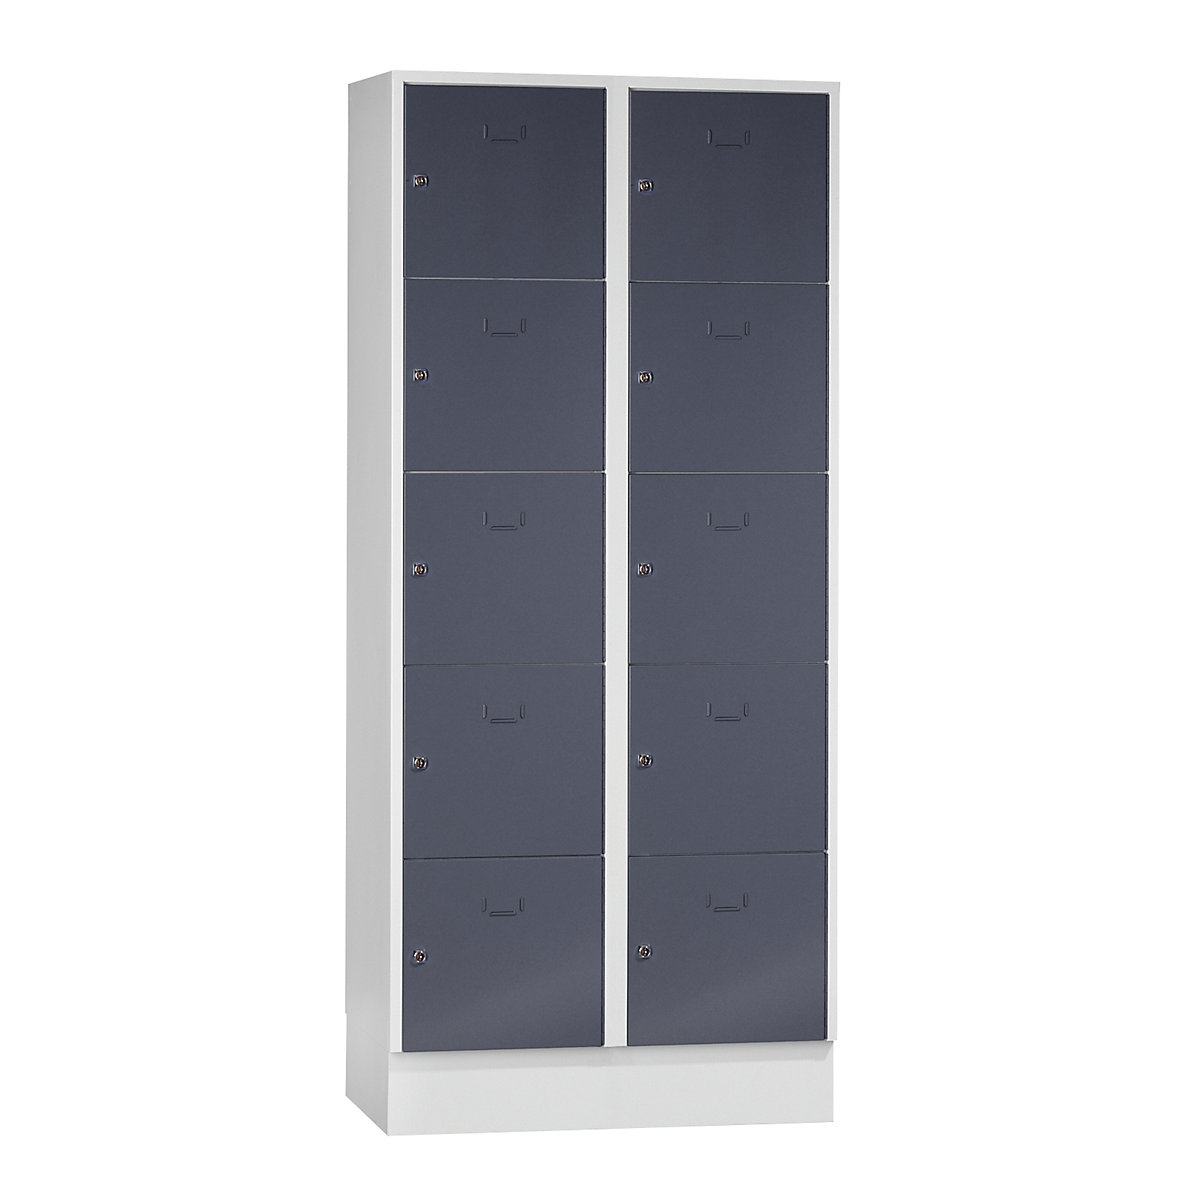 Cloakroom locker system – Wolf, 10 compartments, compartment width 400 mm, basalt grey / light grey-6